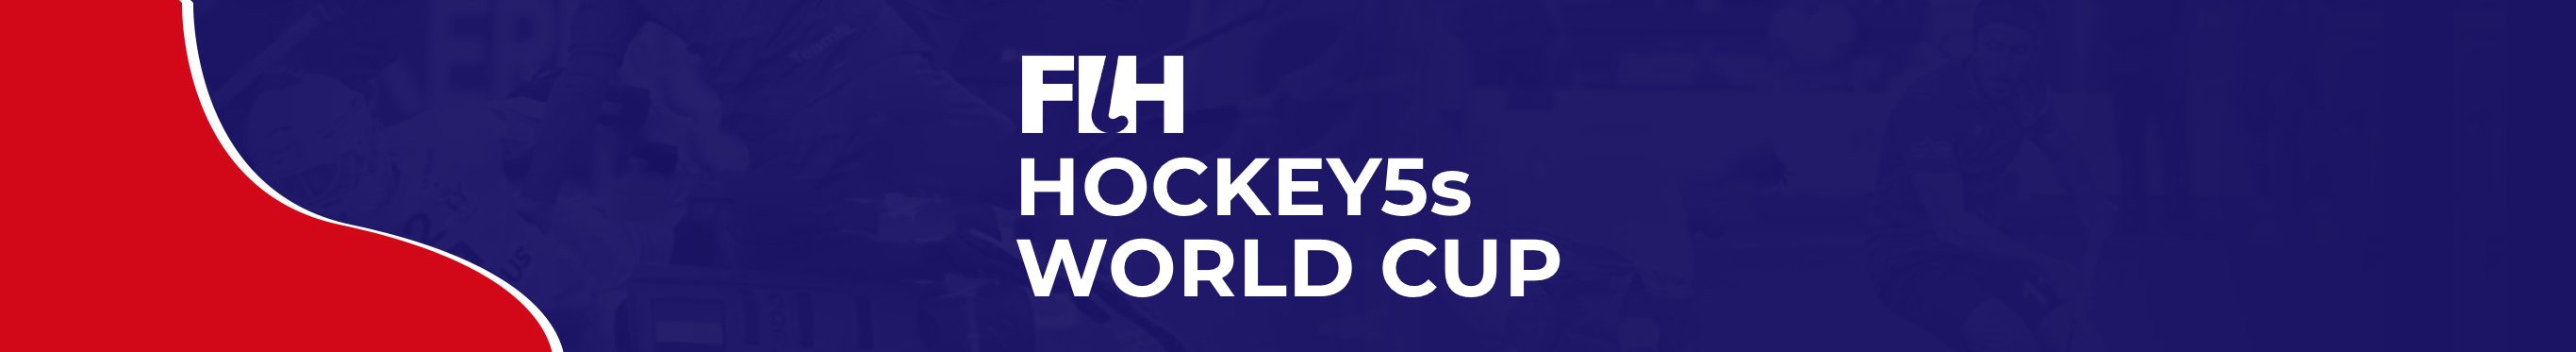 Hockey5s World Cup | Official FIH website